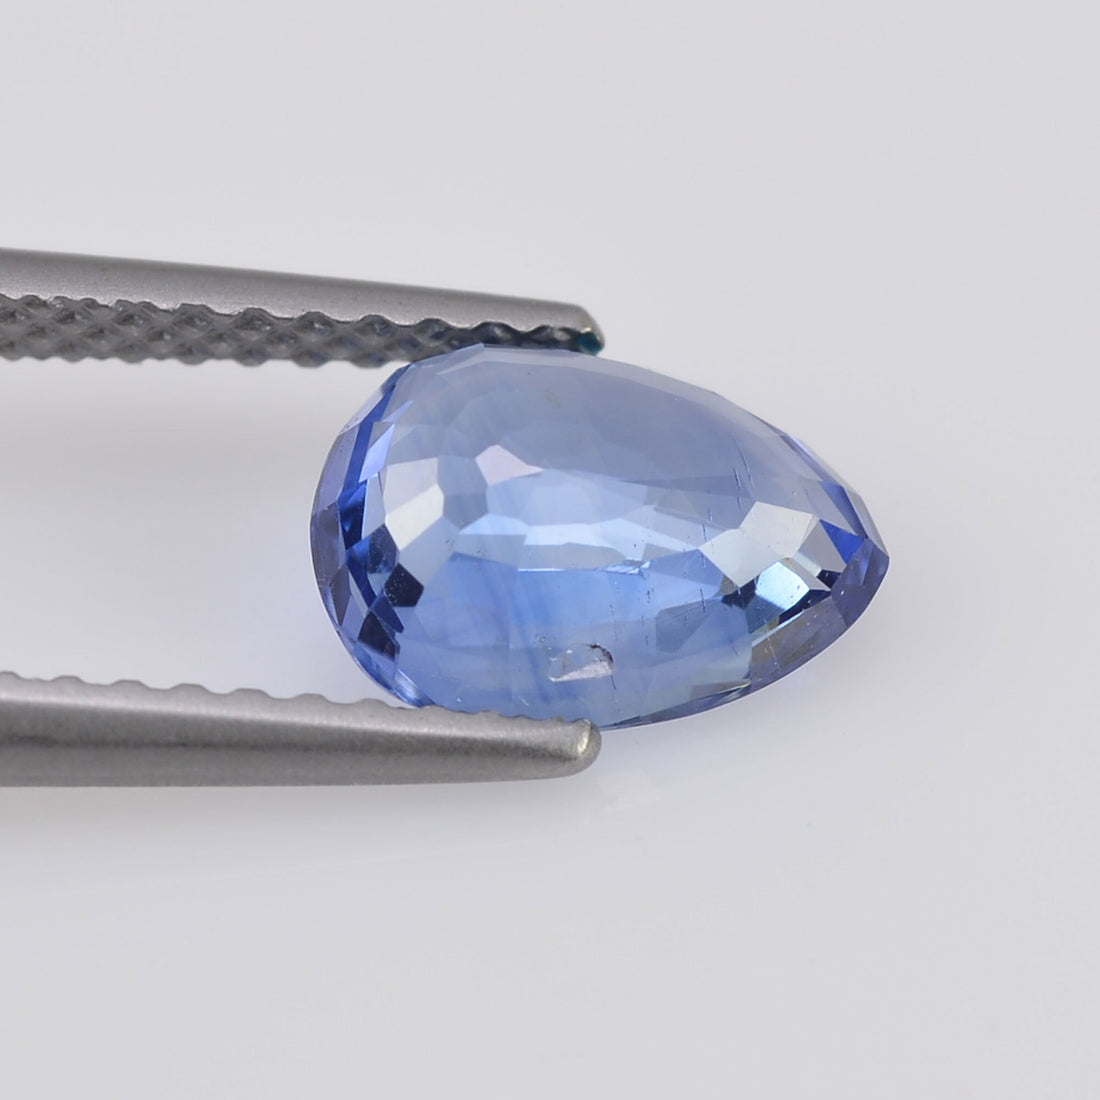 1.52 cts Natural Blue Sapphire Loose Gemstone Pear Cut Certified